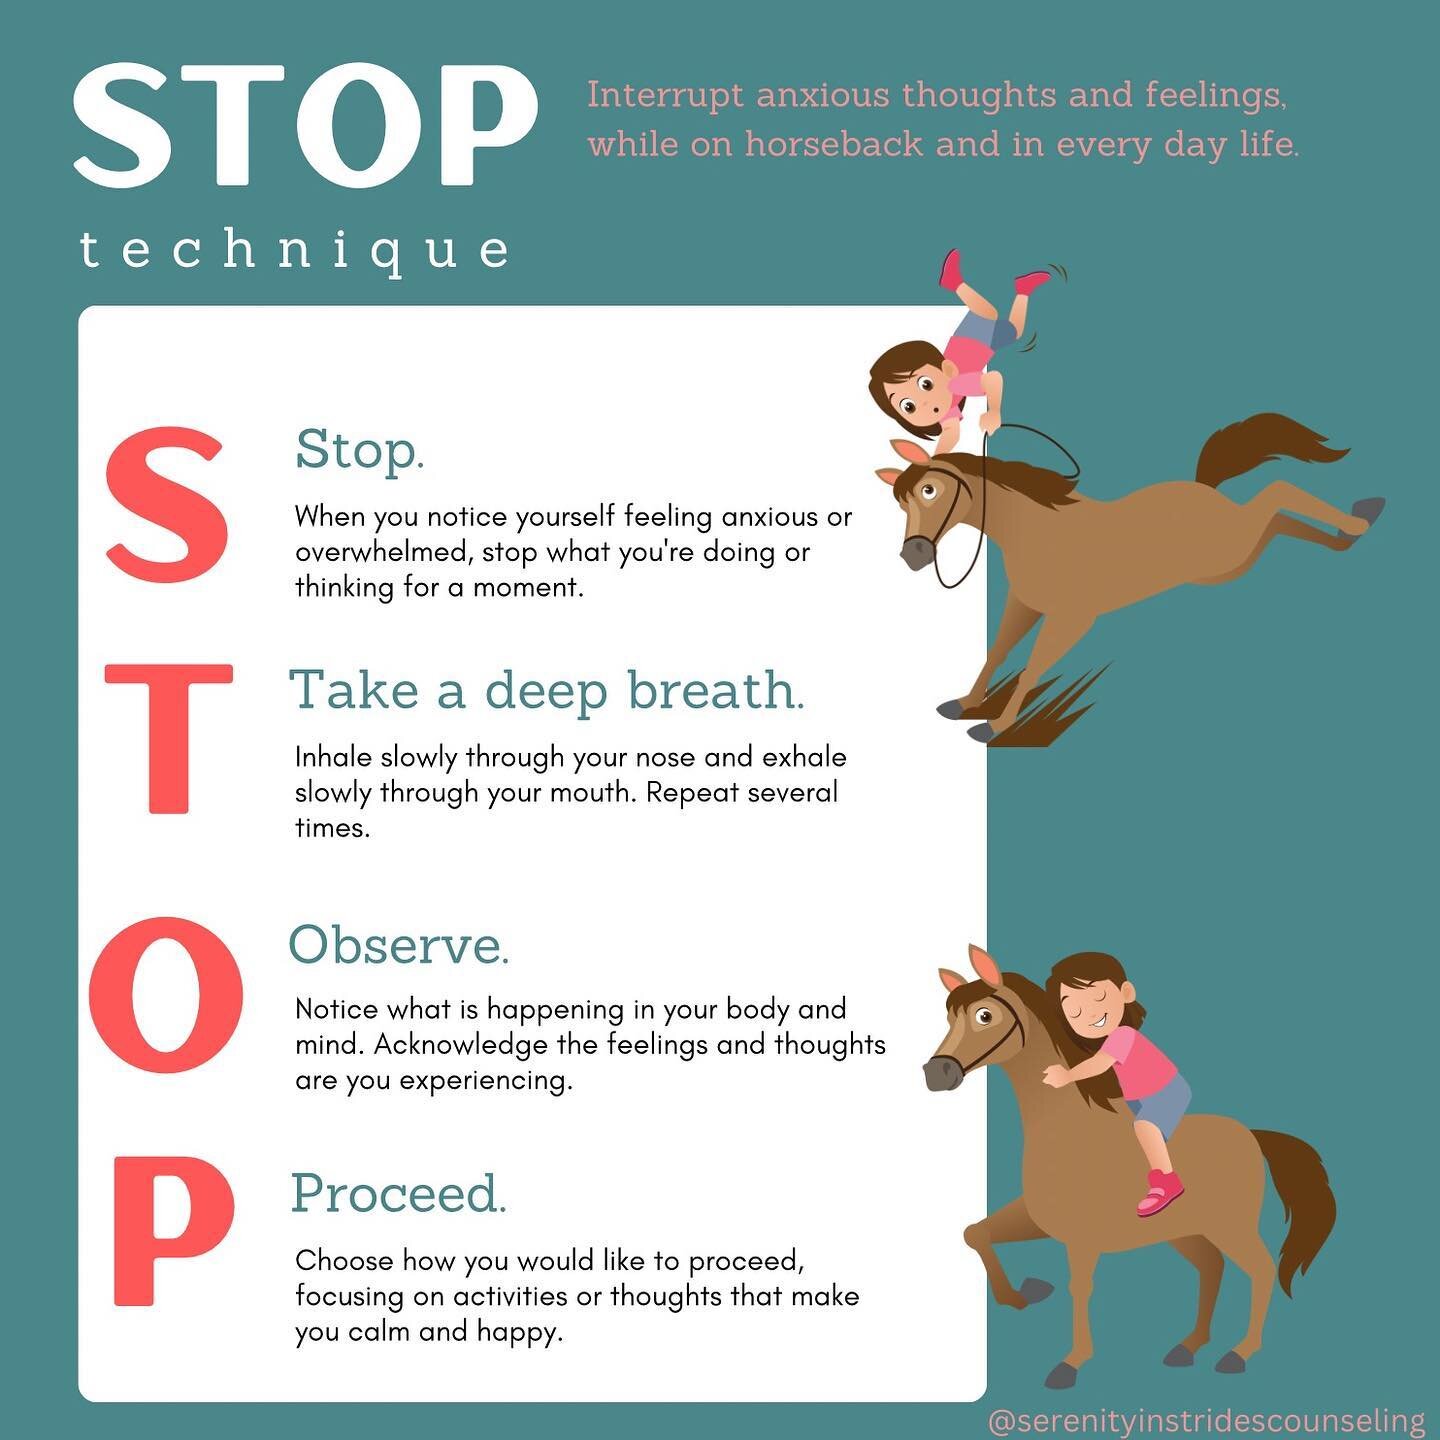 This is one of my favorite DBT skills to utilize with clients, both in the therapy office and when riding horses. Just this week when working with a client on horseback the horse started to pick up on the persons emotions and get stressed, so we (S) 